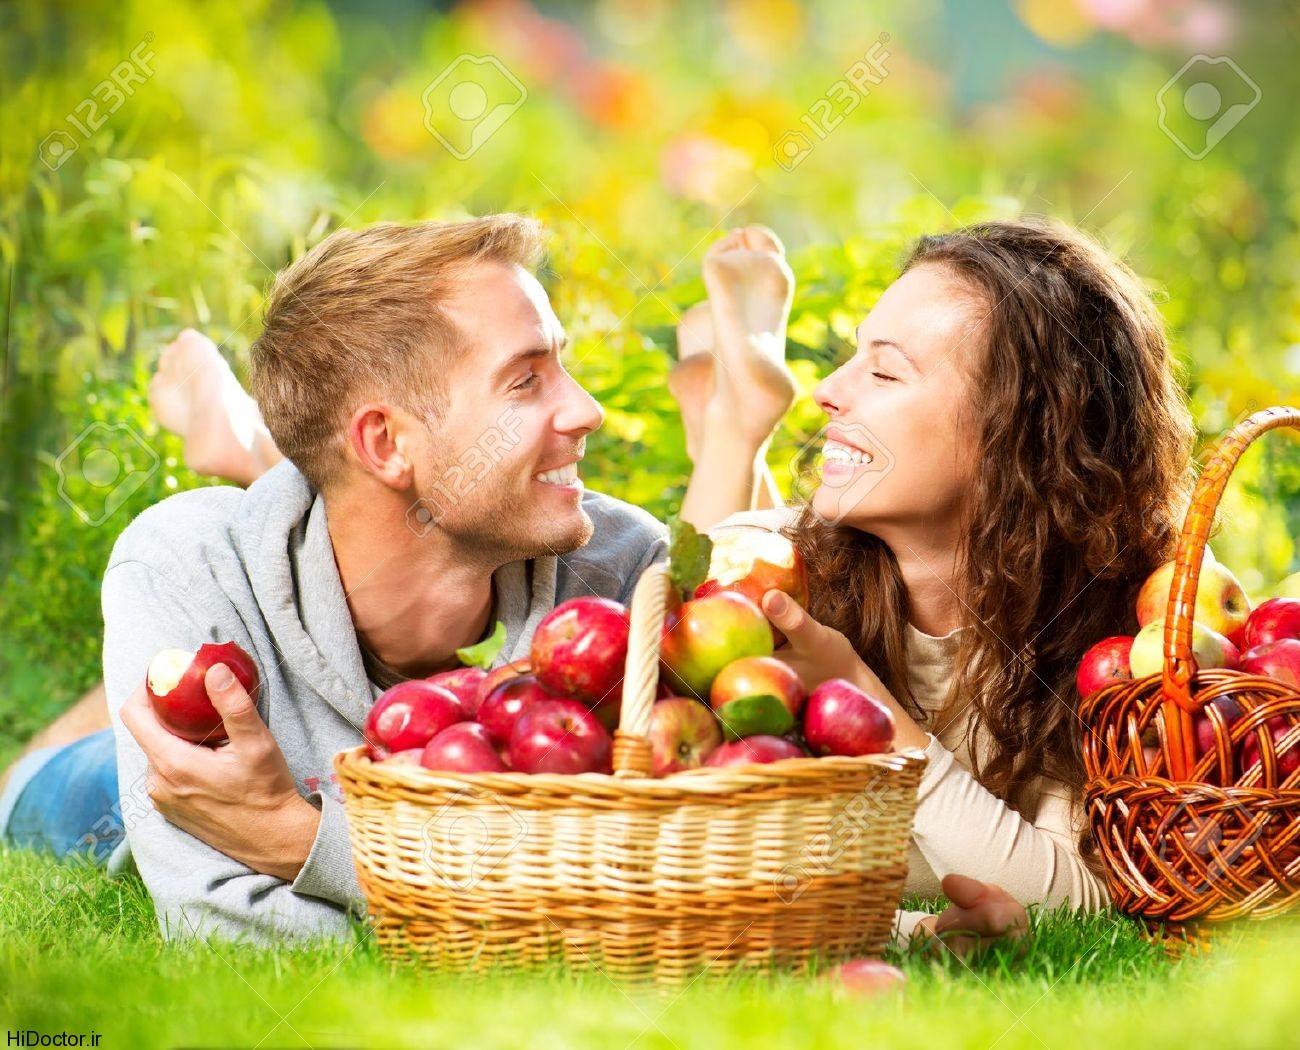 15512917-couple-relaxing-on-the-grass-and-eating-apples-in-autumn-garden